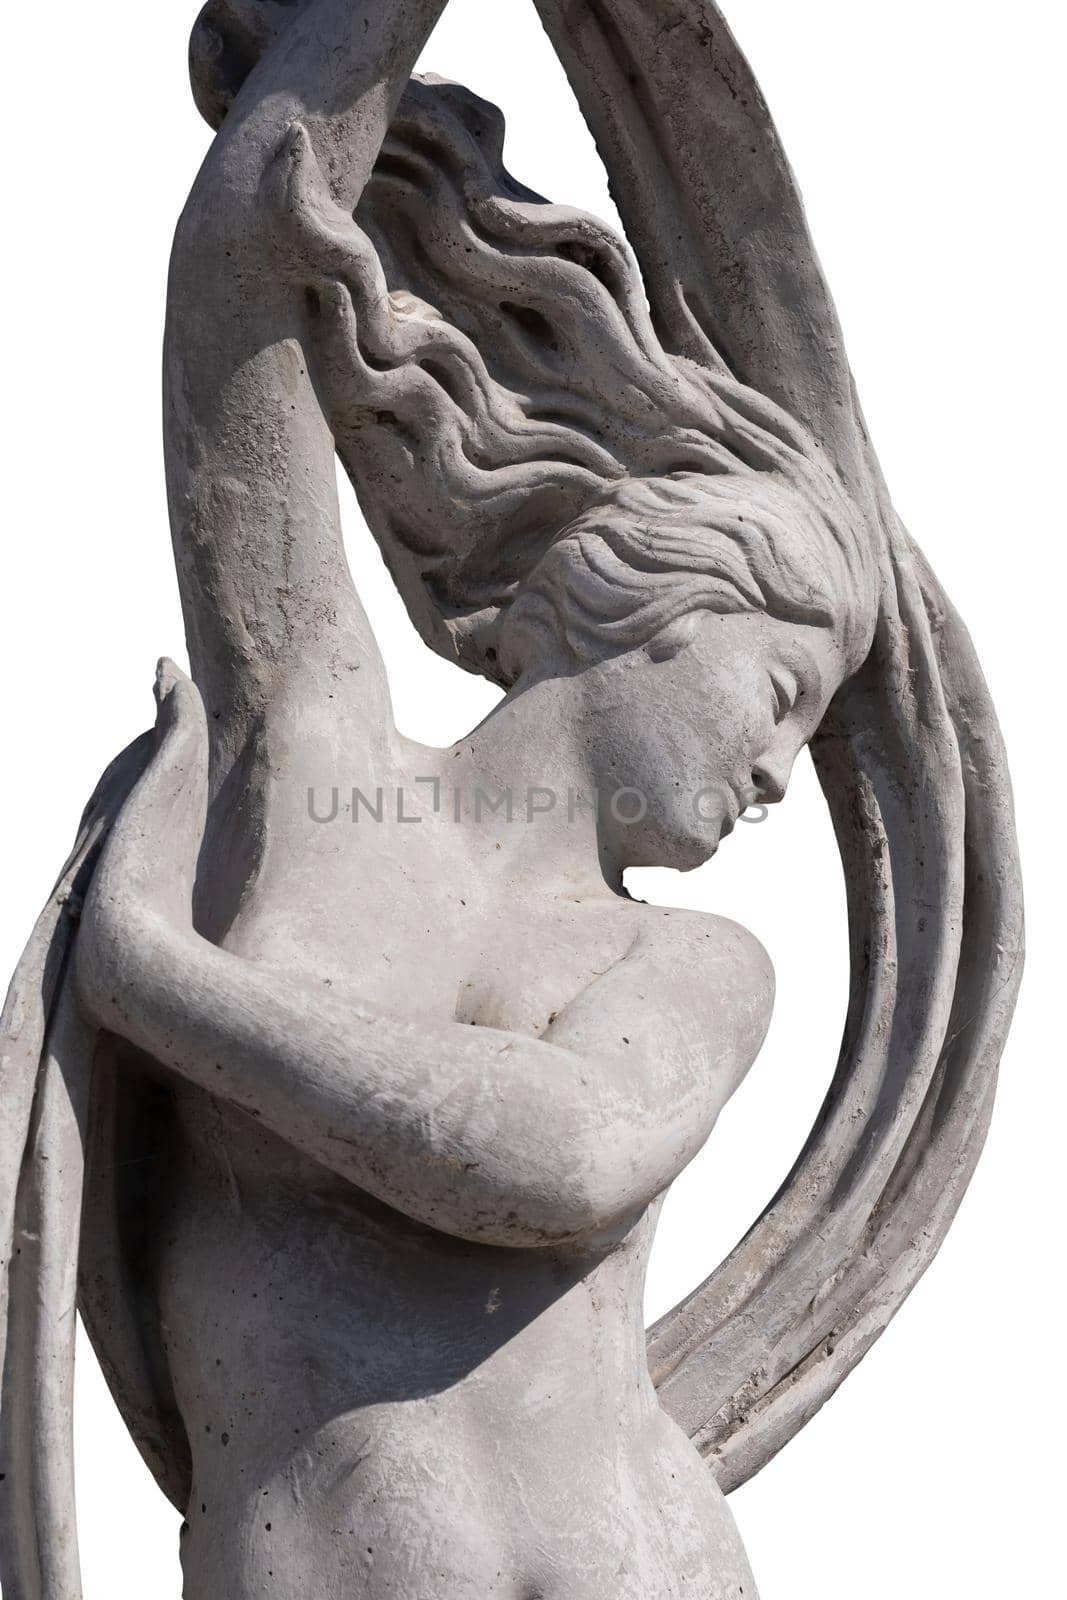 Close up of stone sculpture of naked woman holding fabric on white background. art and classical style romantic figurative stone sculpture.